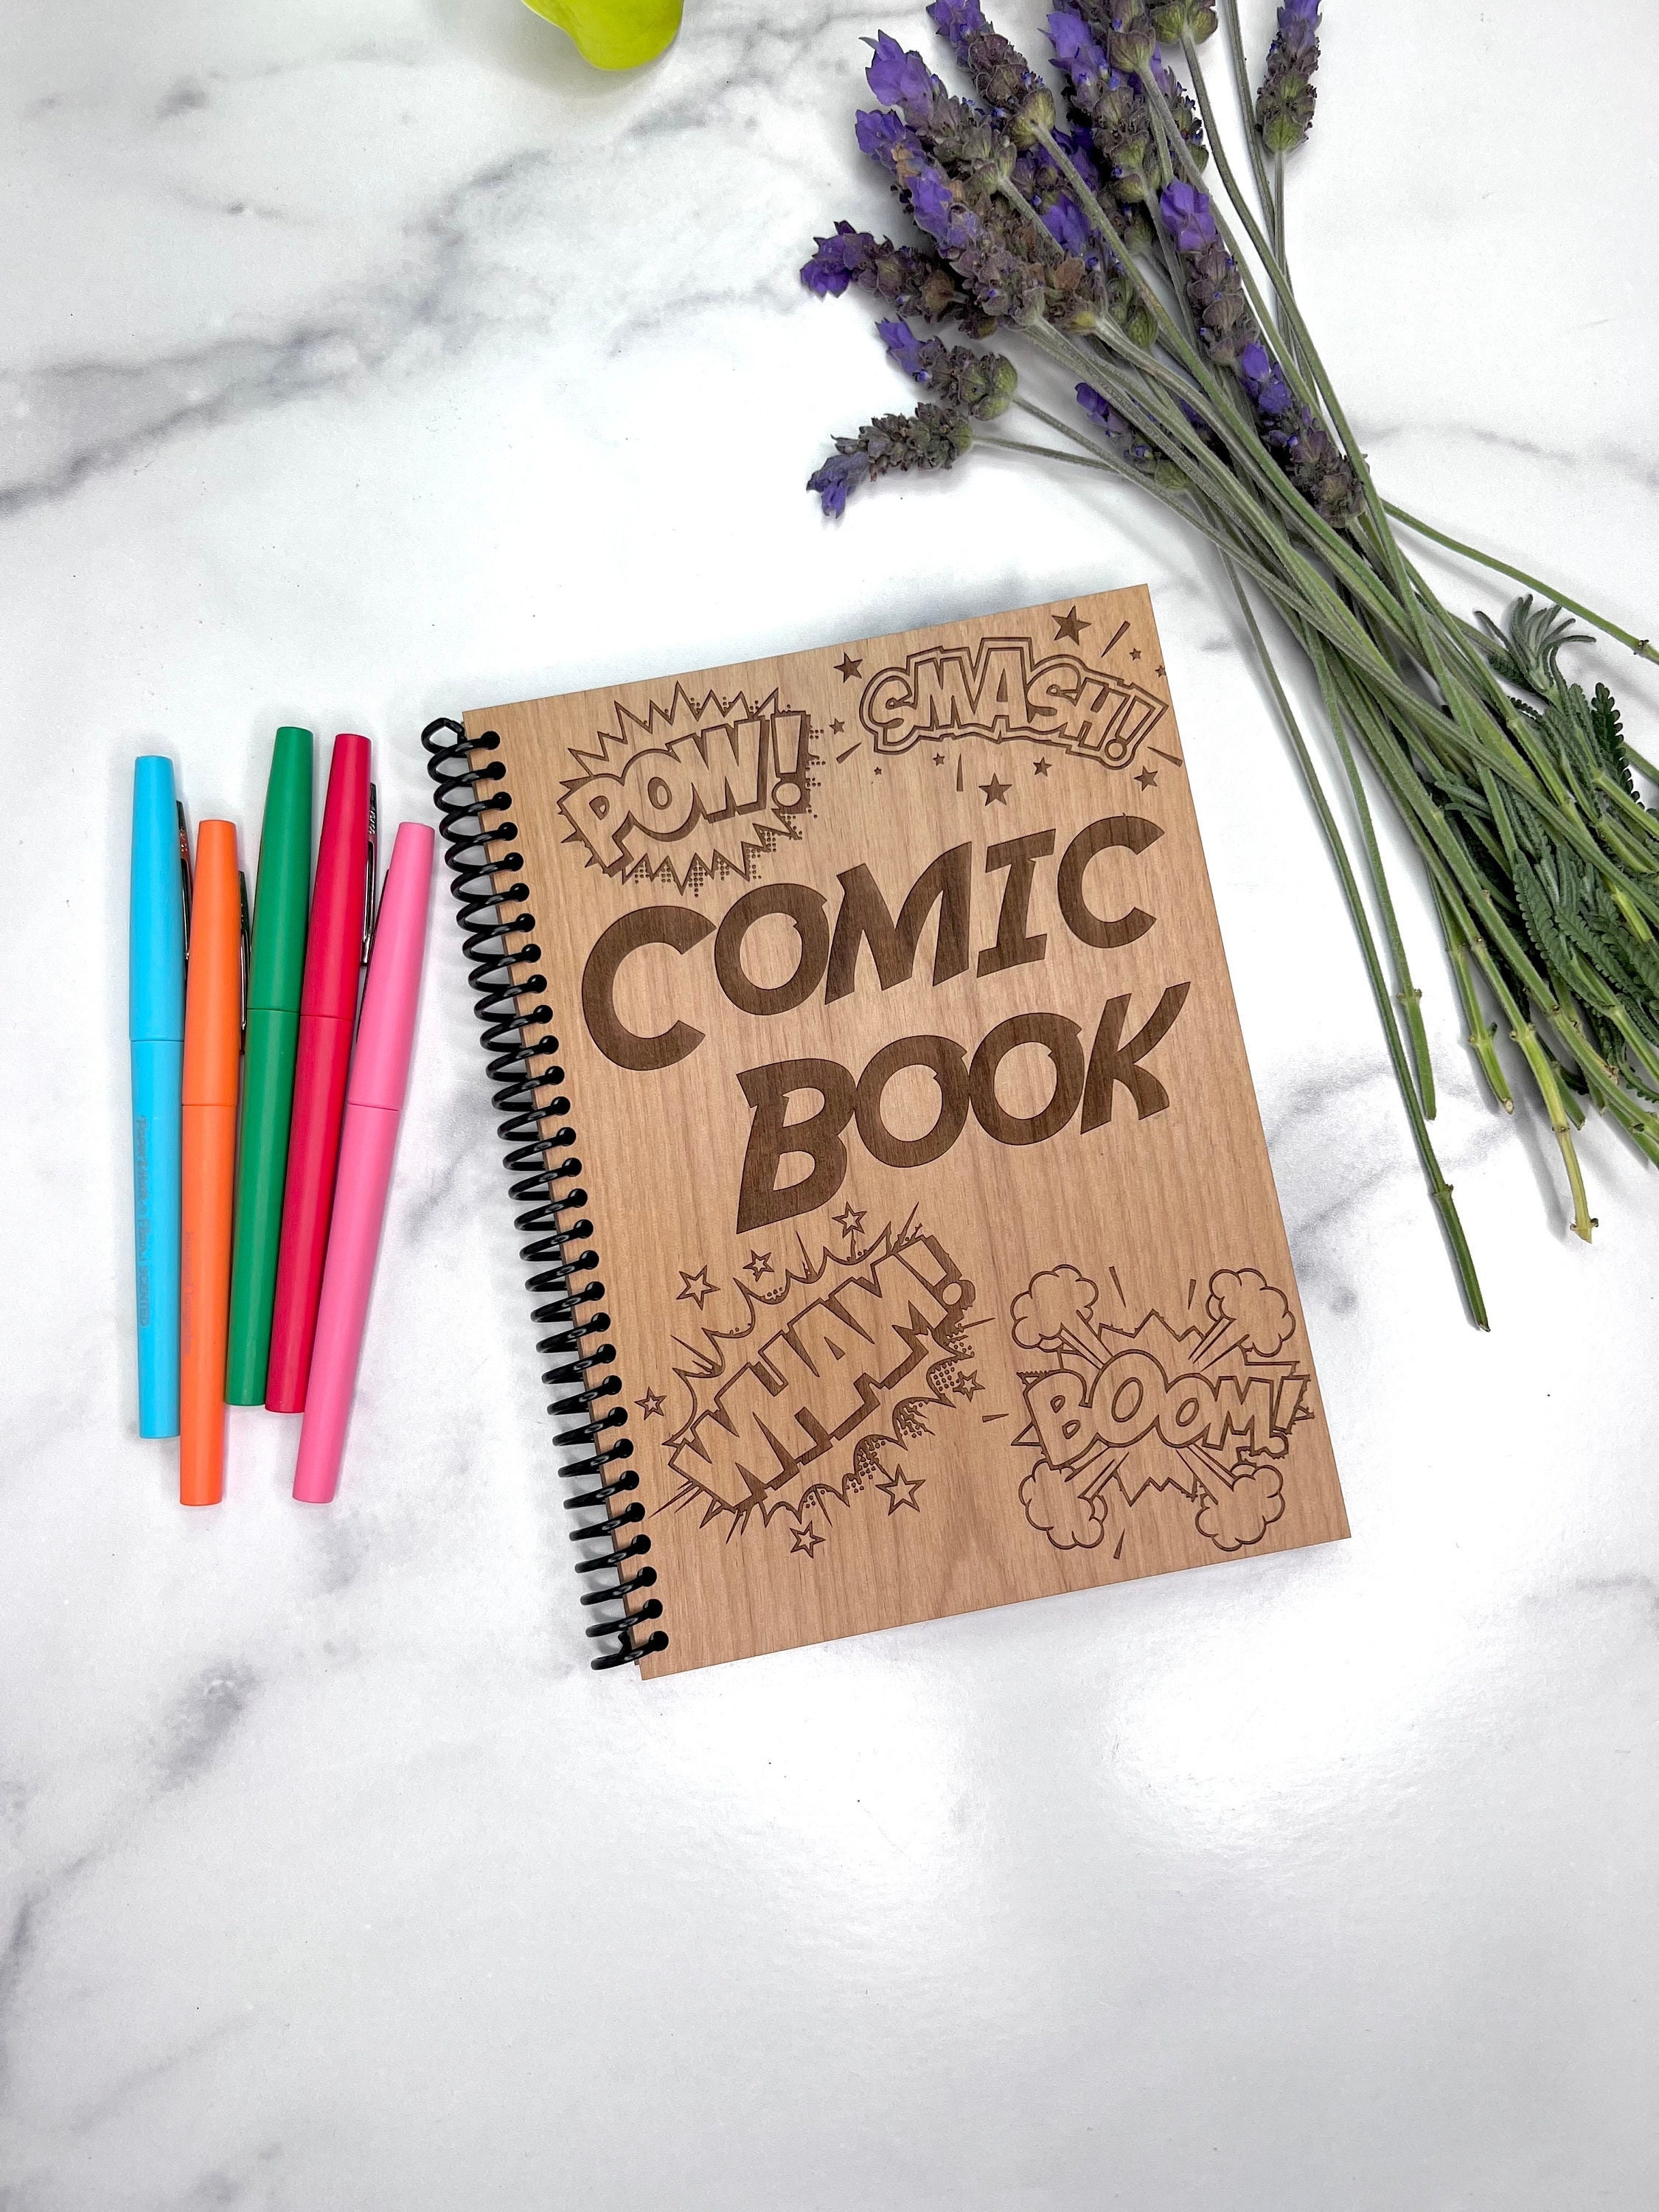 Comic Sketchbook - lay flat design, ready for action!